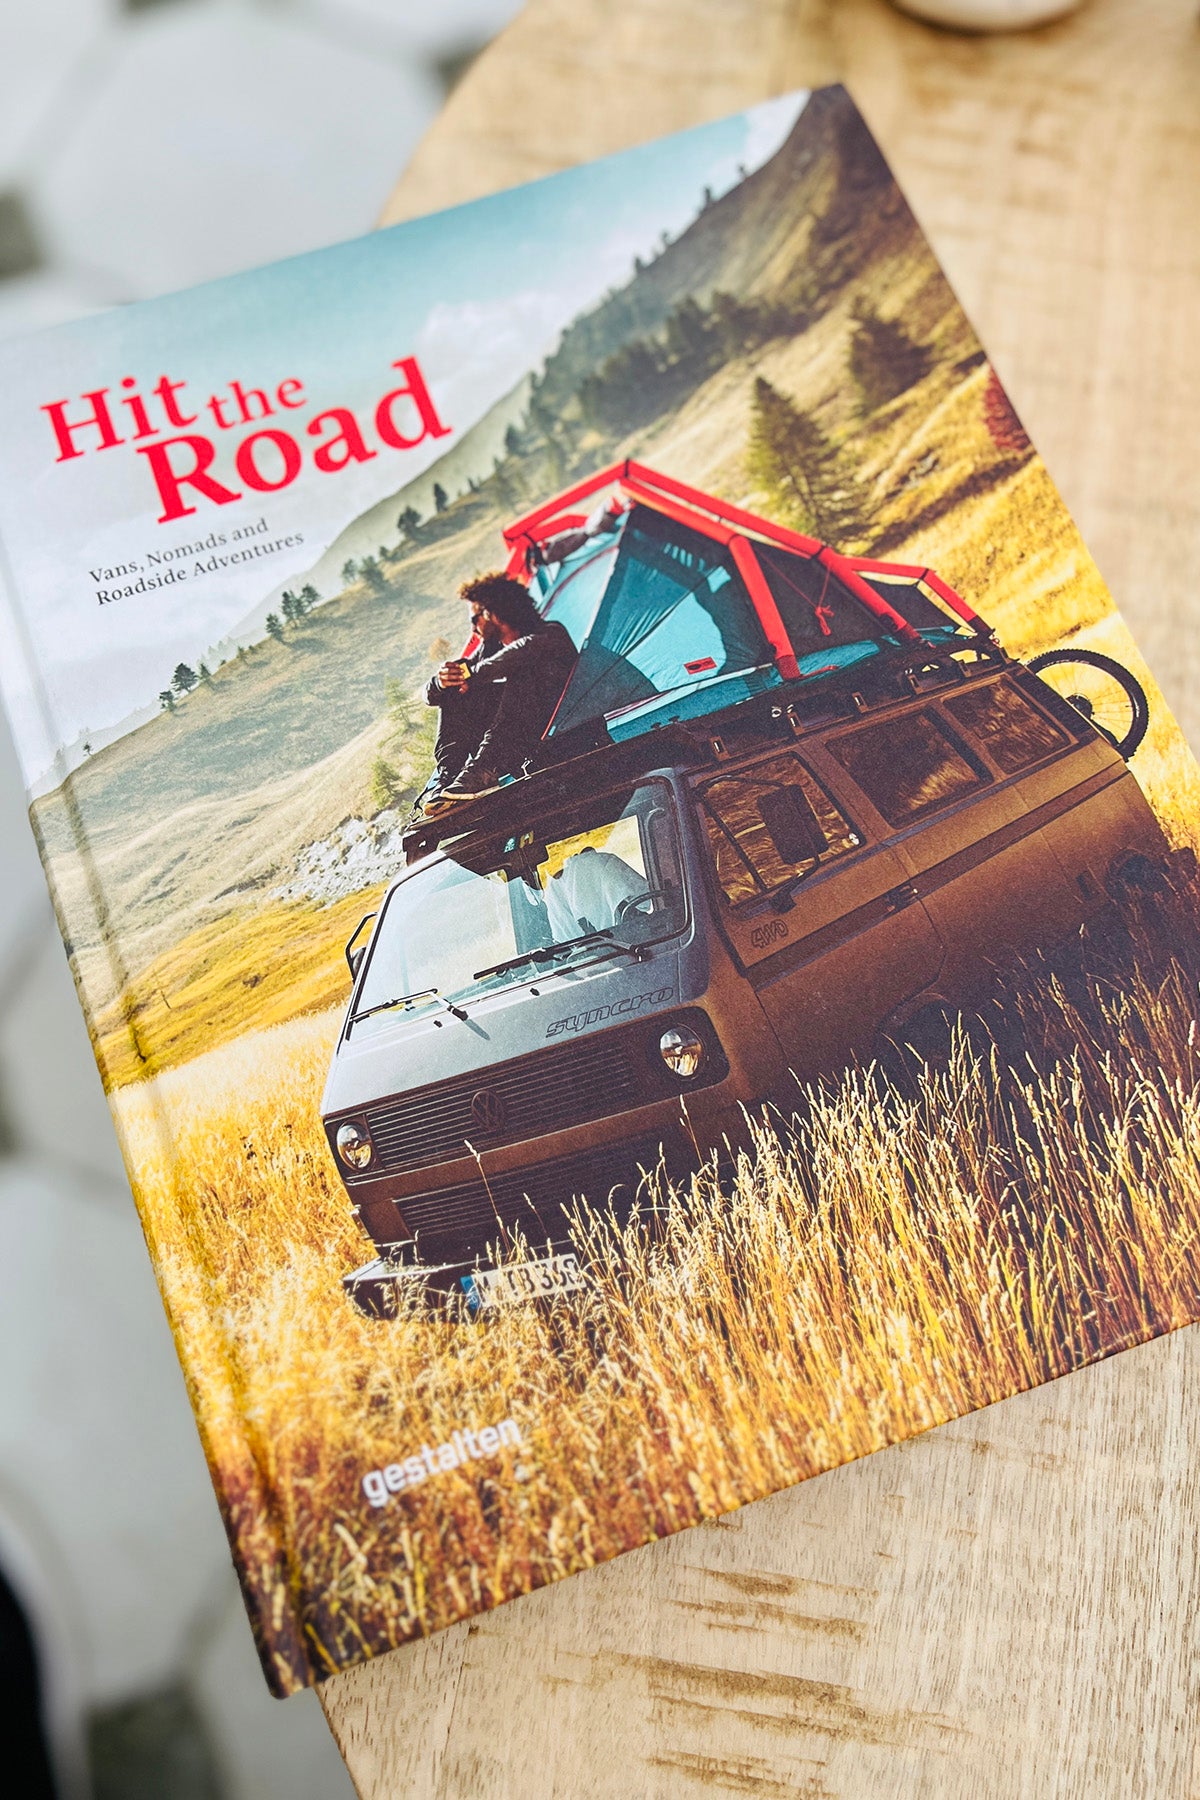 Book "Hit the Road"